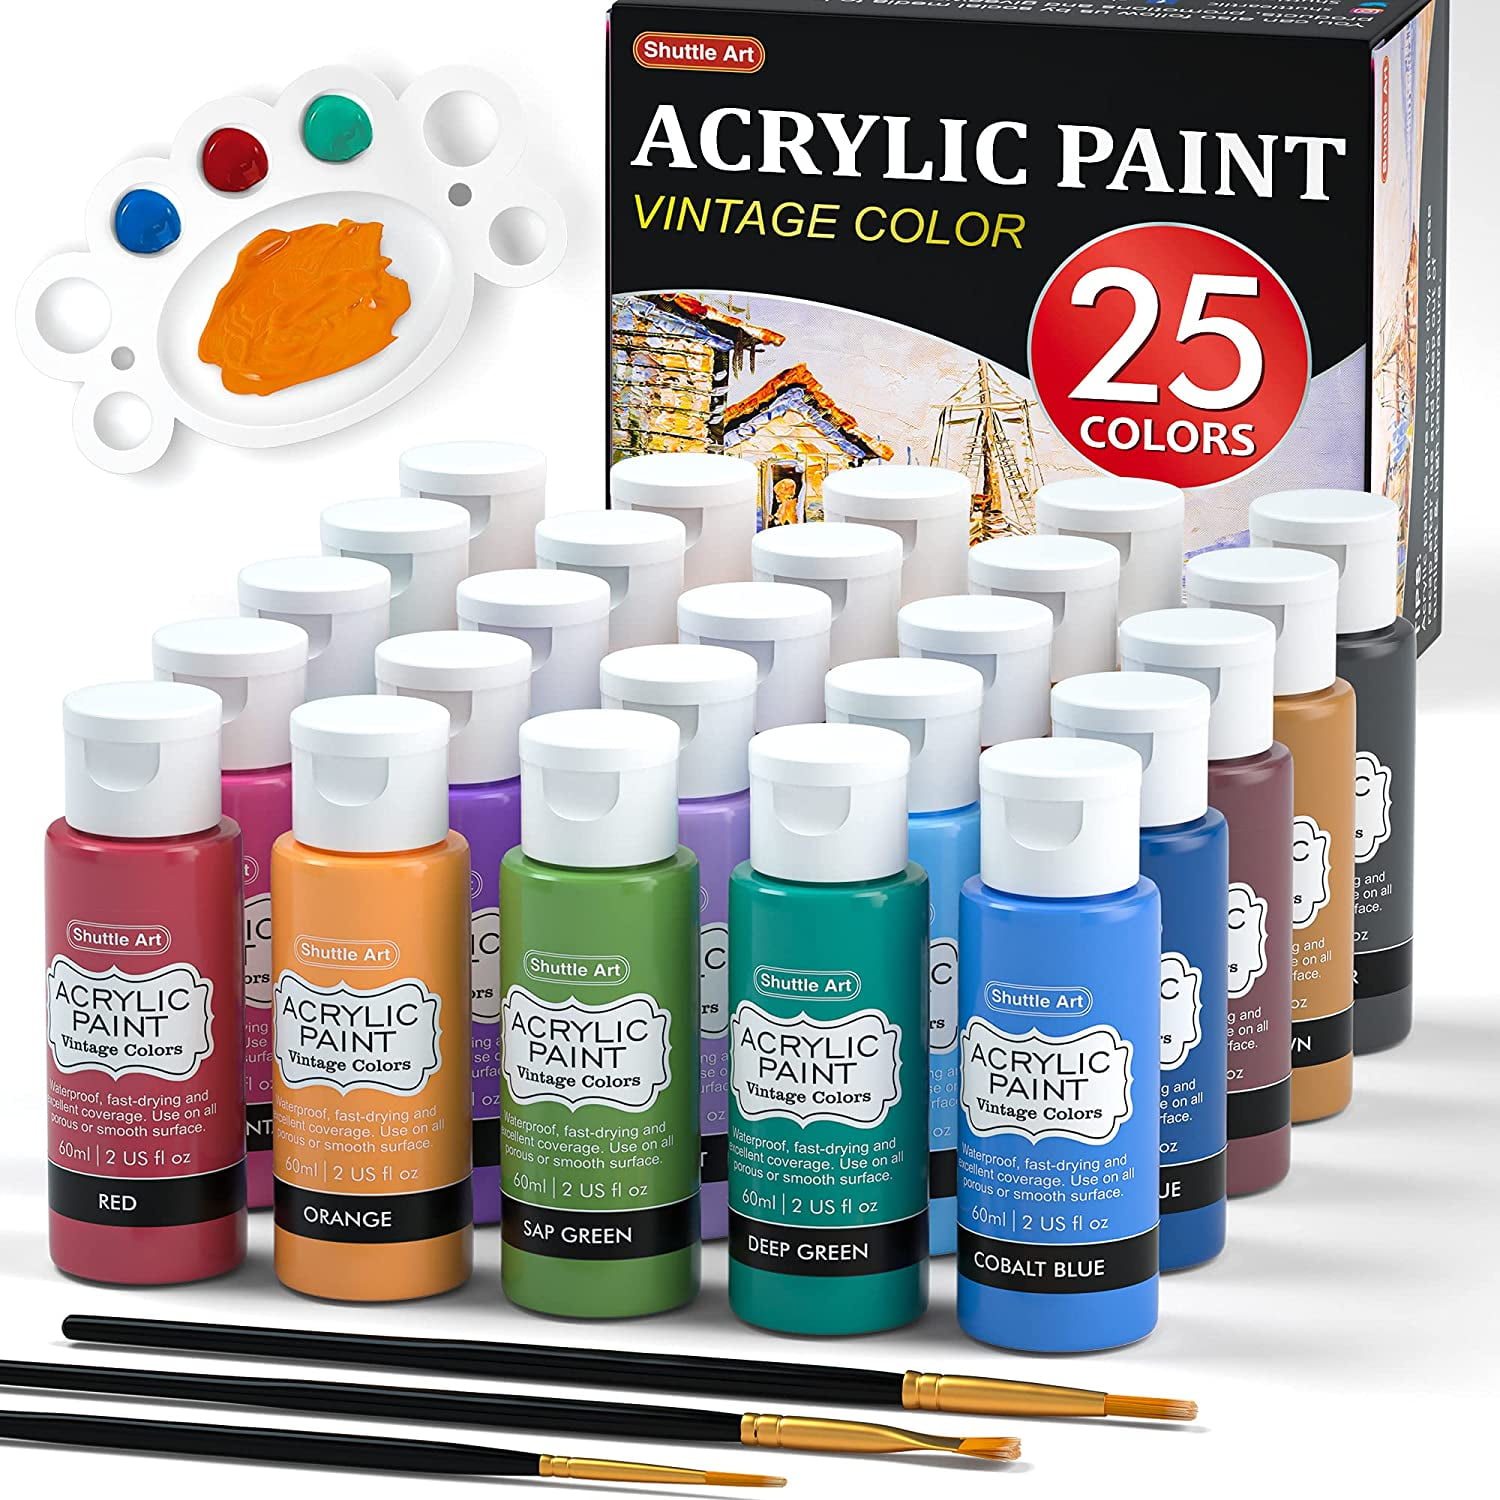 Apple Barrel Acrylic Paint in Assorted Colors (2 oz), 20592, Tapestry Wine